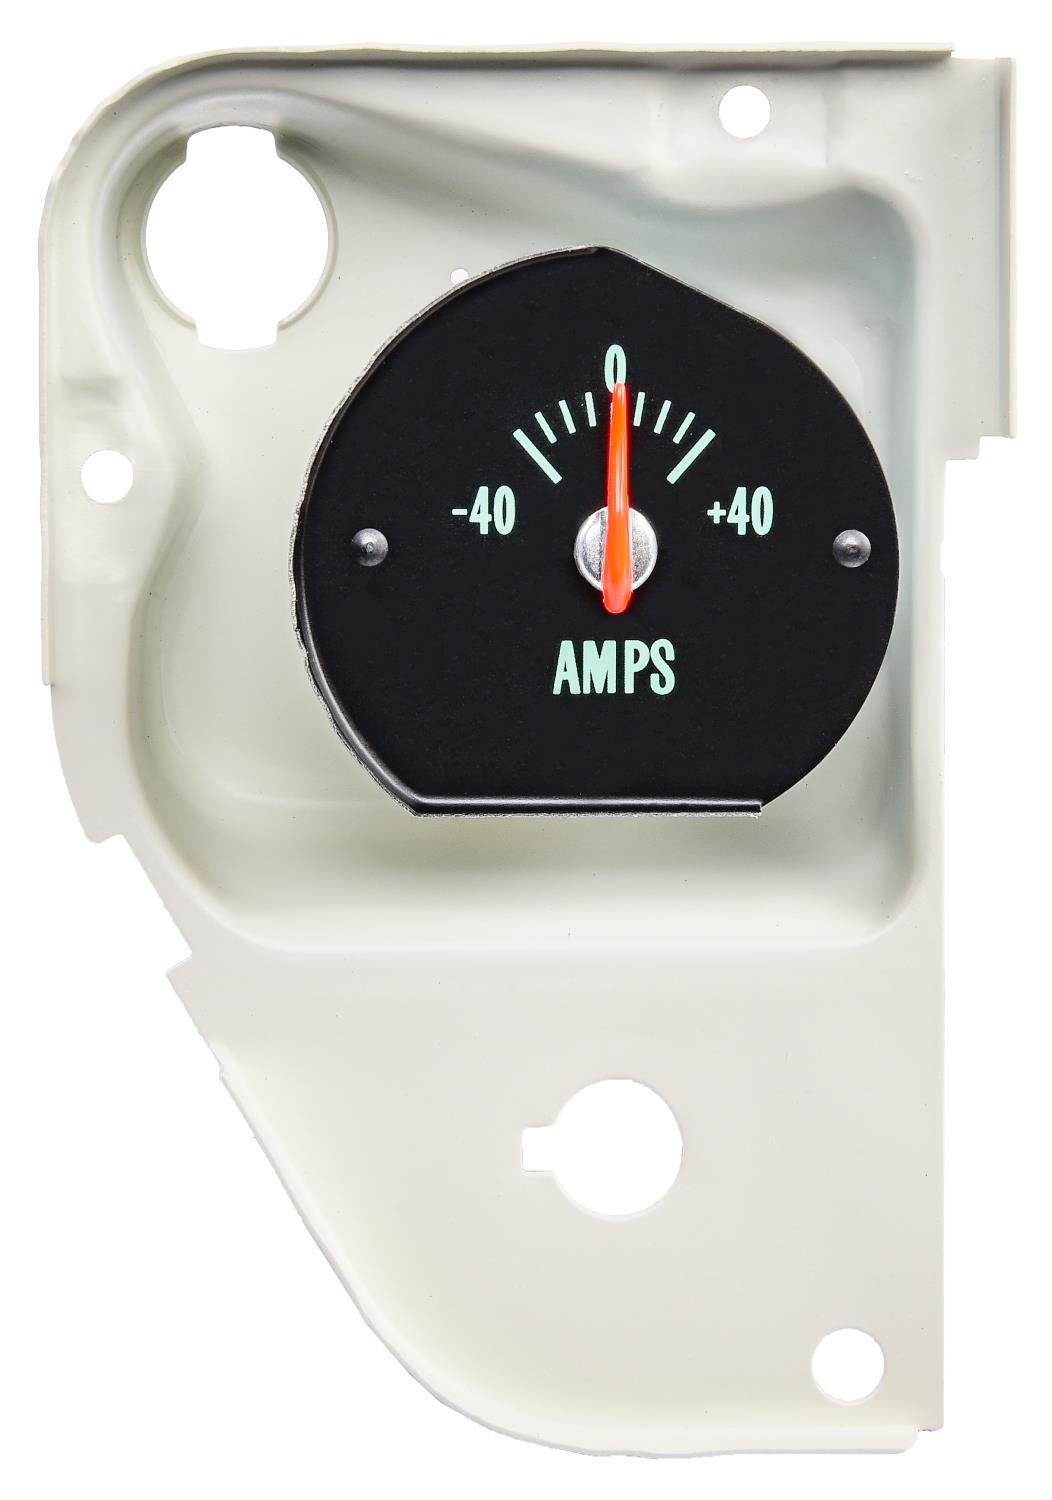 Factory Style Amp Gauge for 1970 Chevrolet Chevelle, El Camino and Monte Carlo